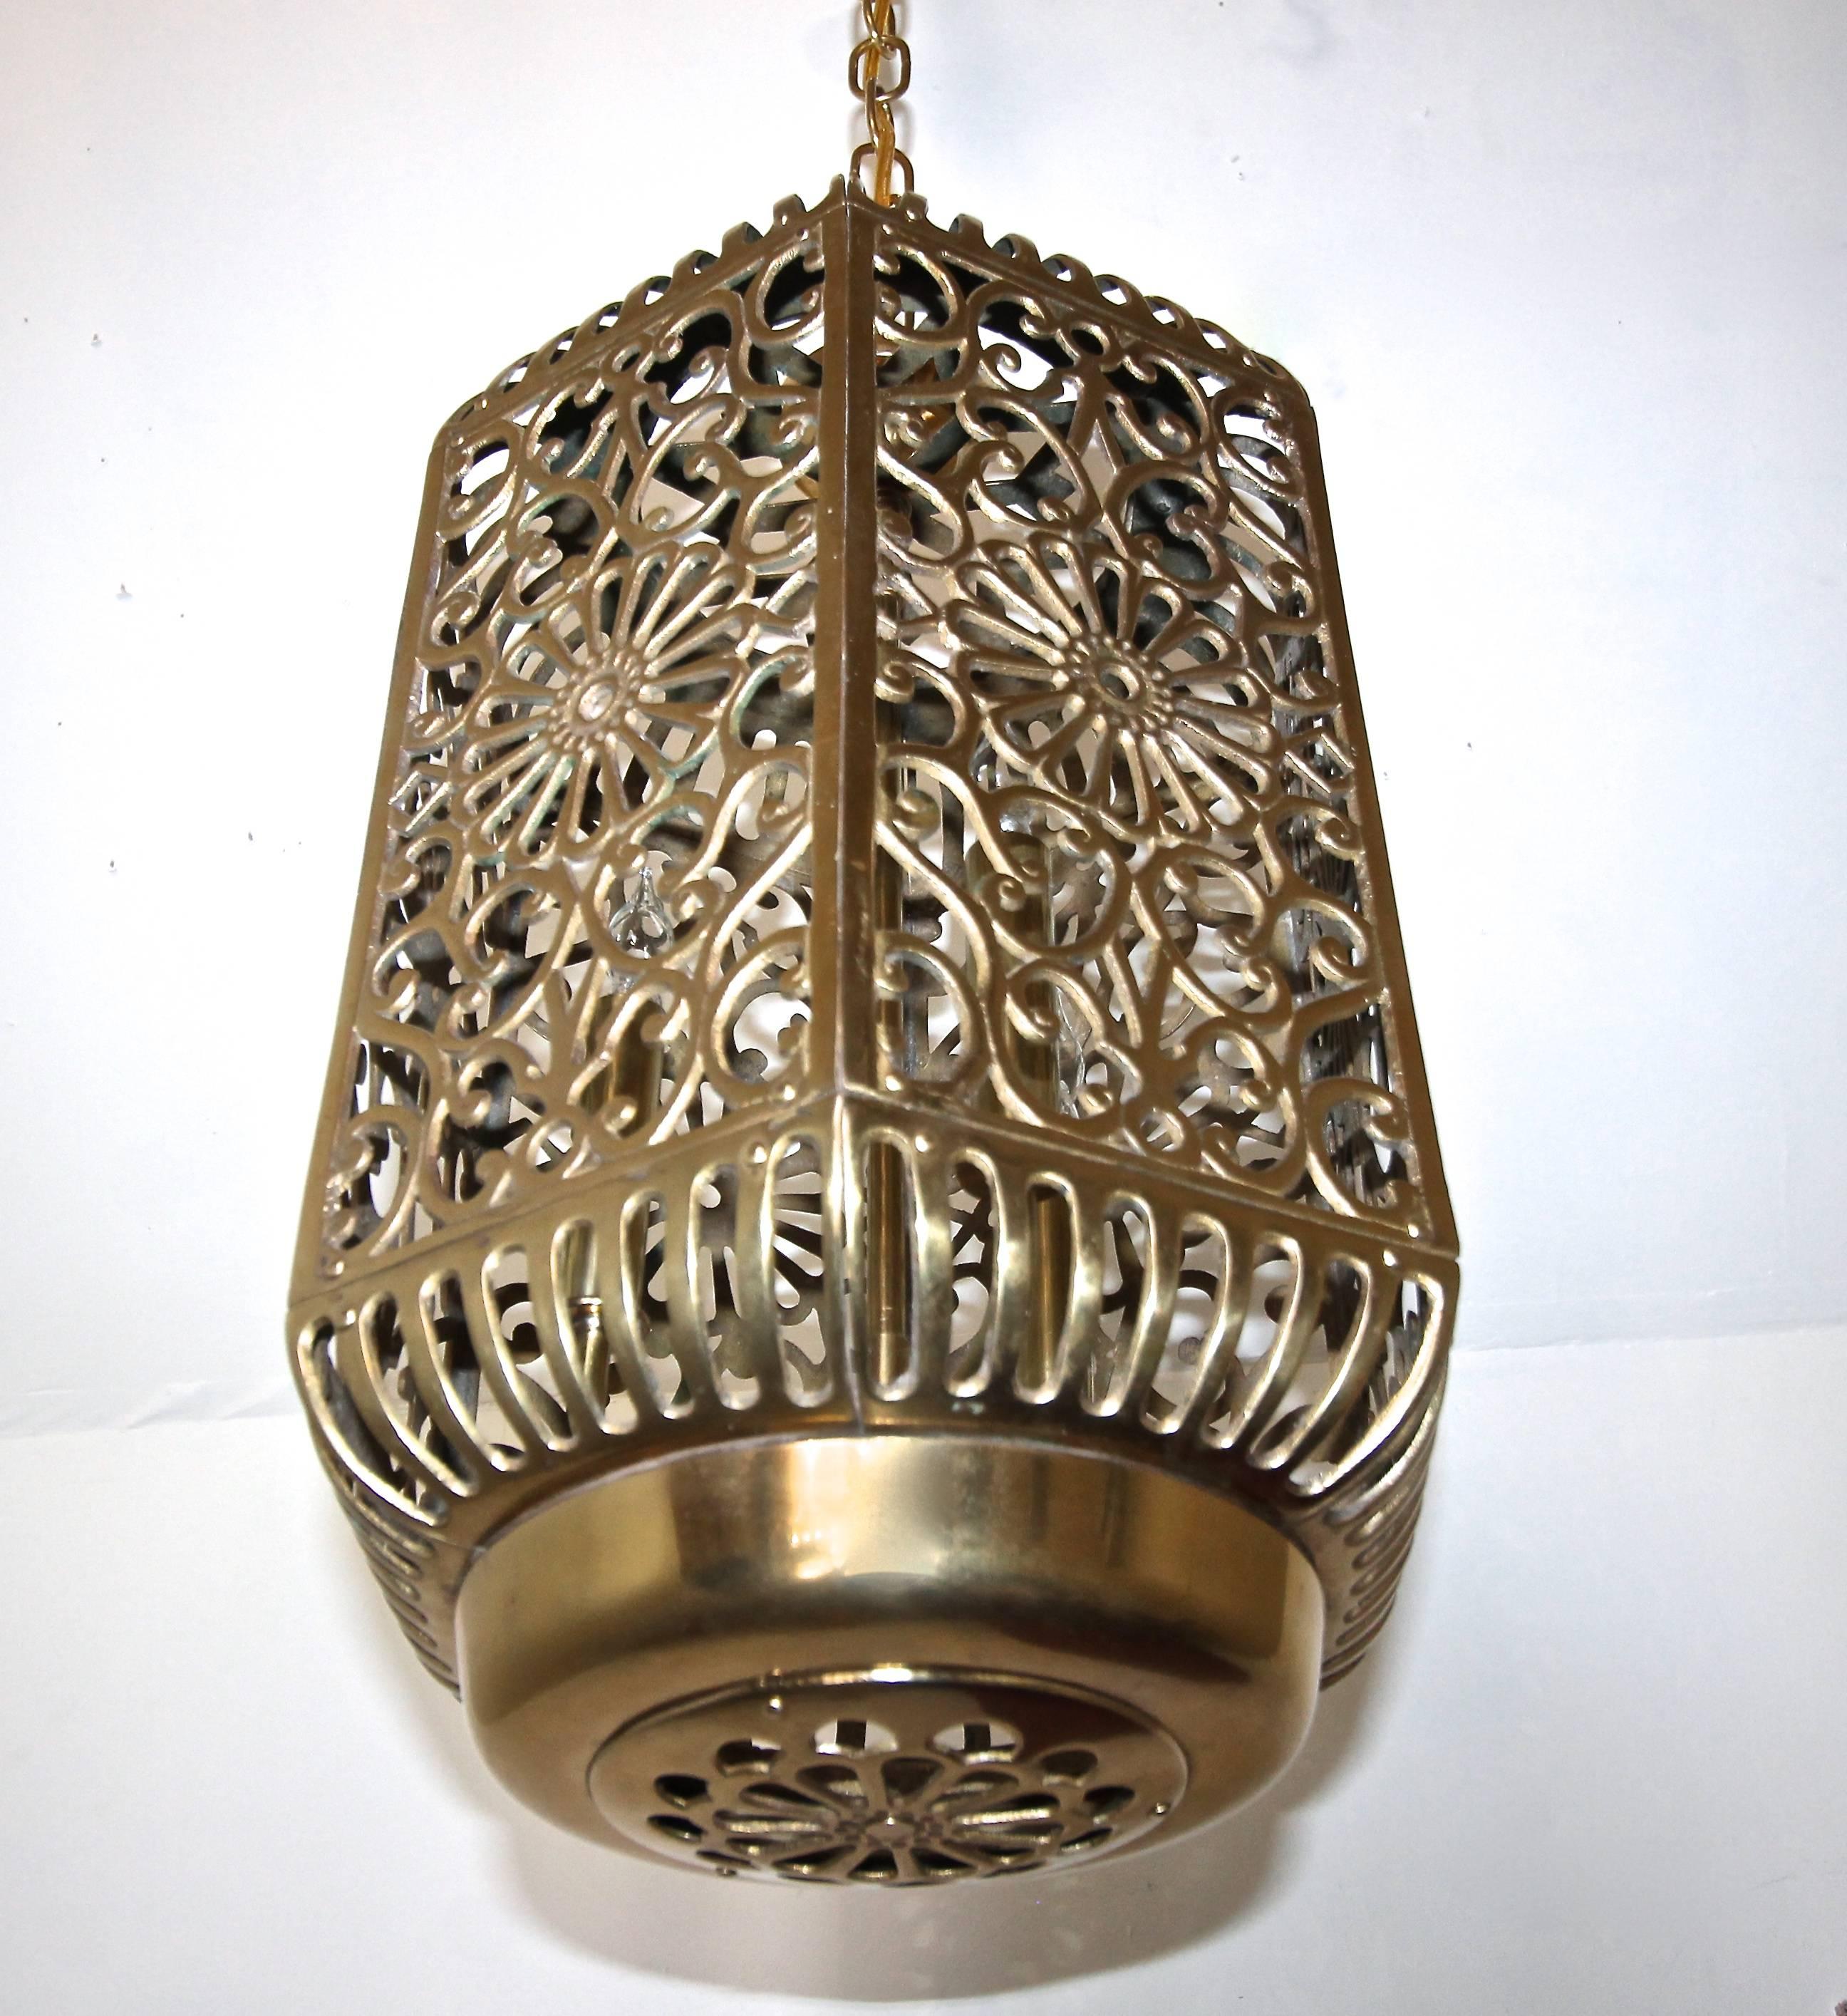 A large and high quality filigree brass ceiling or pendant light with 